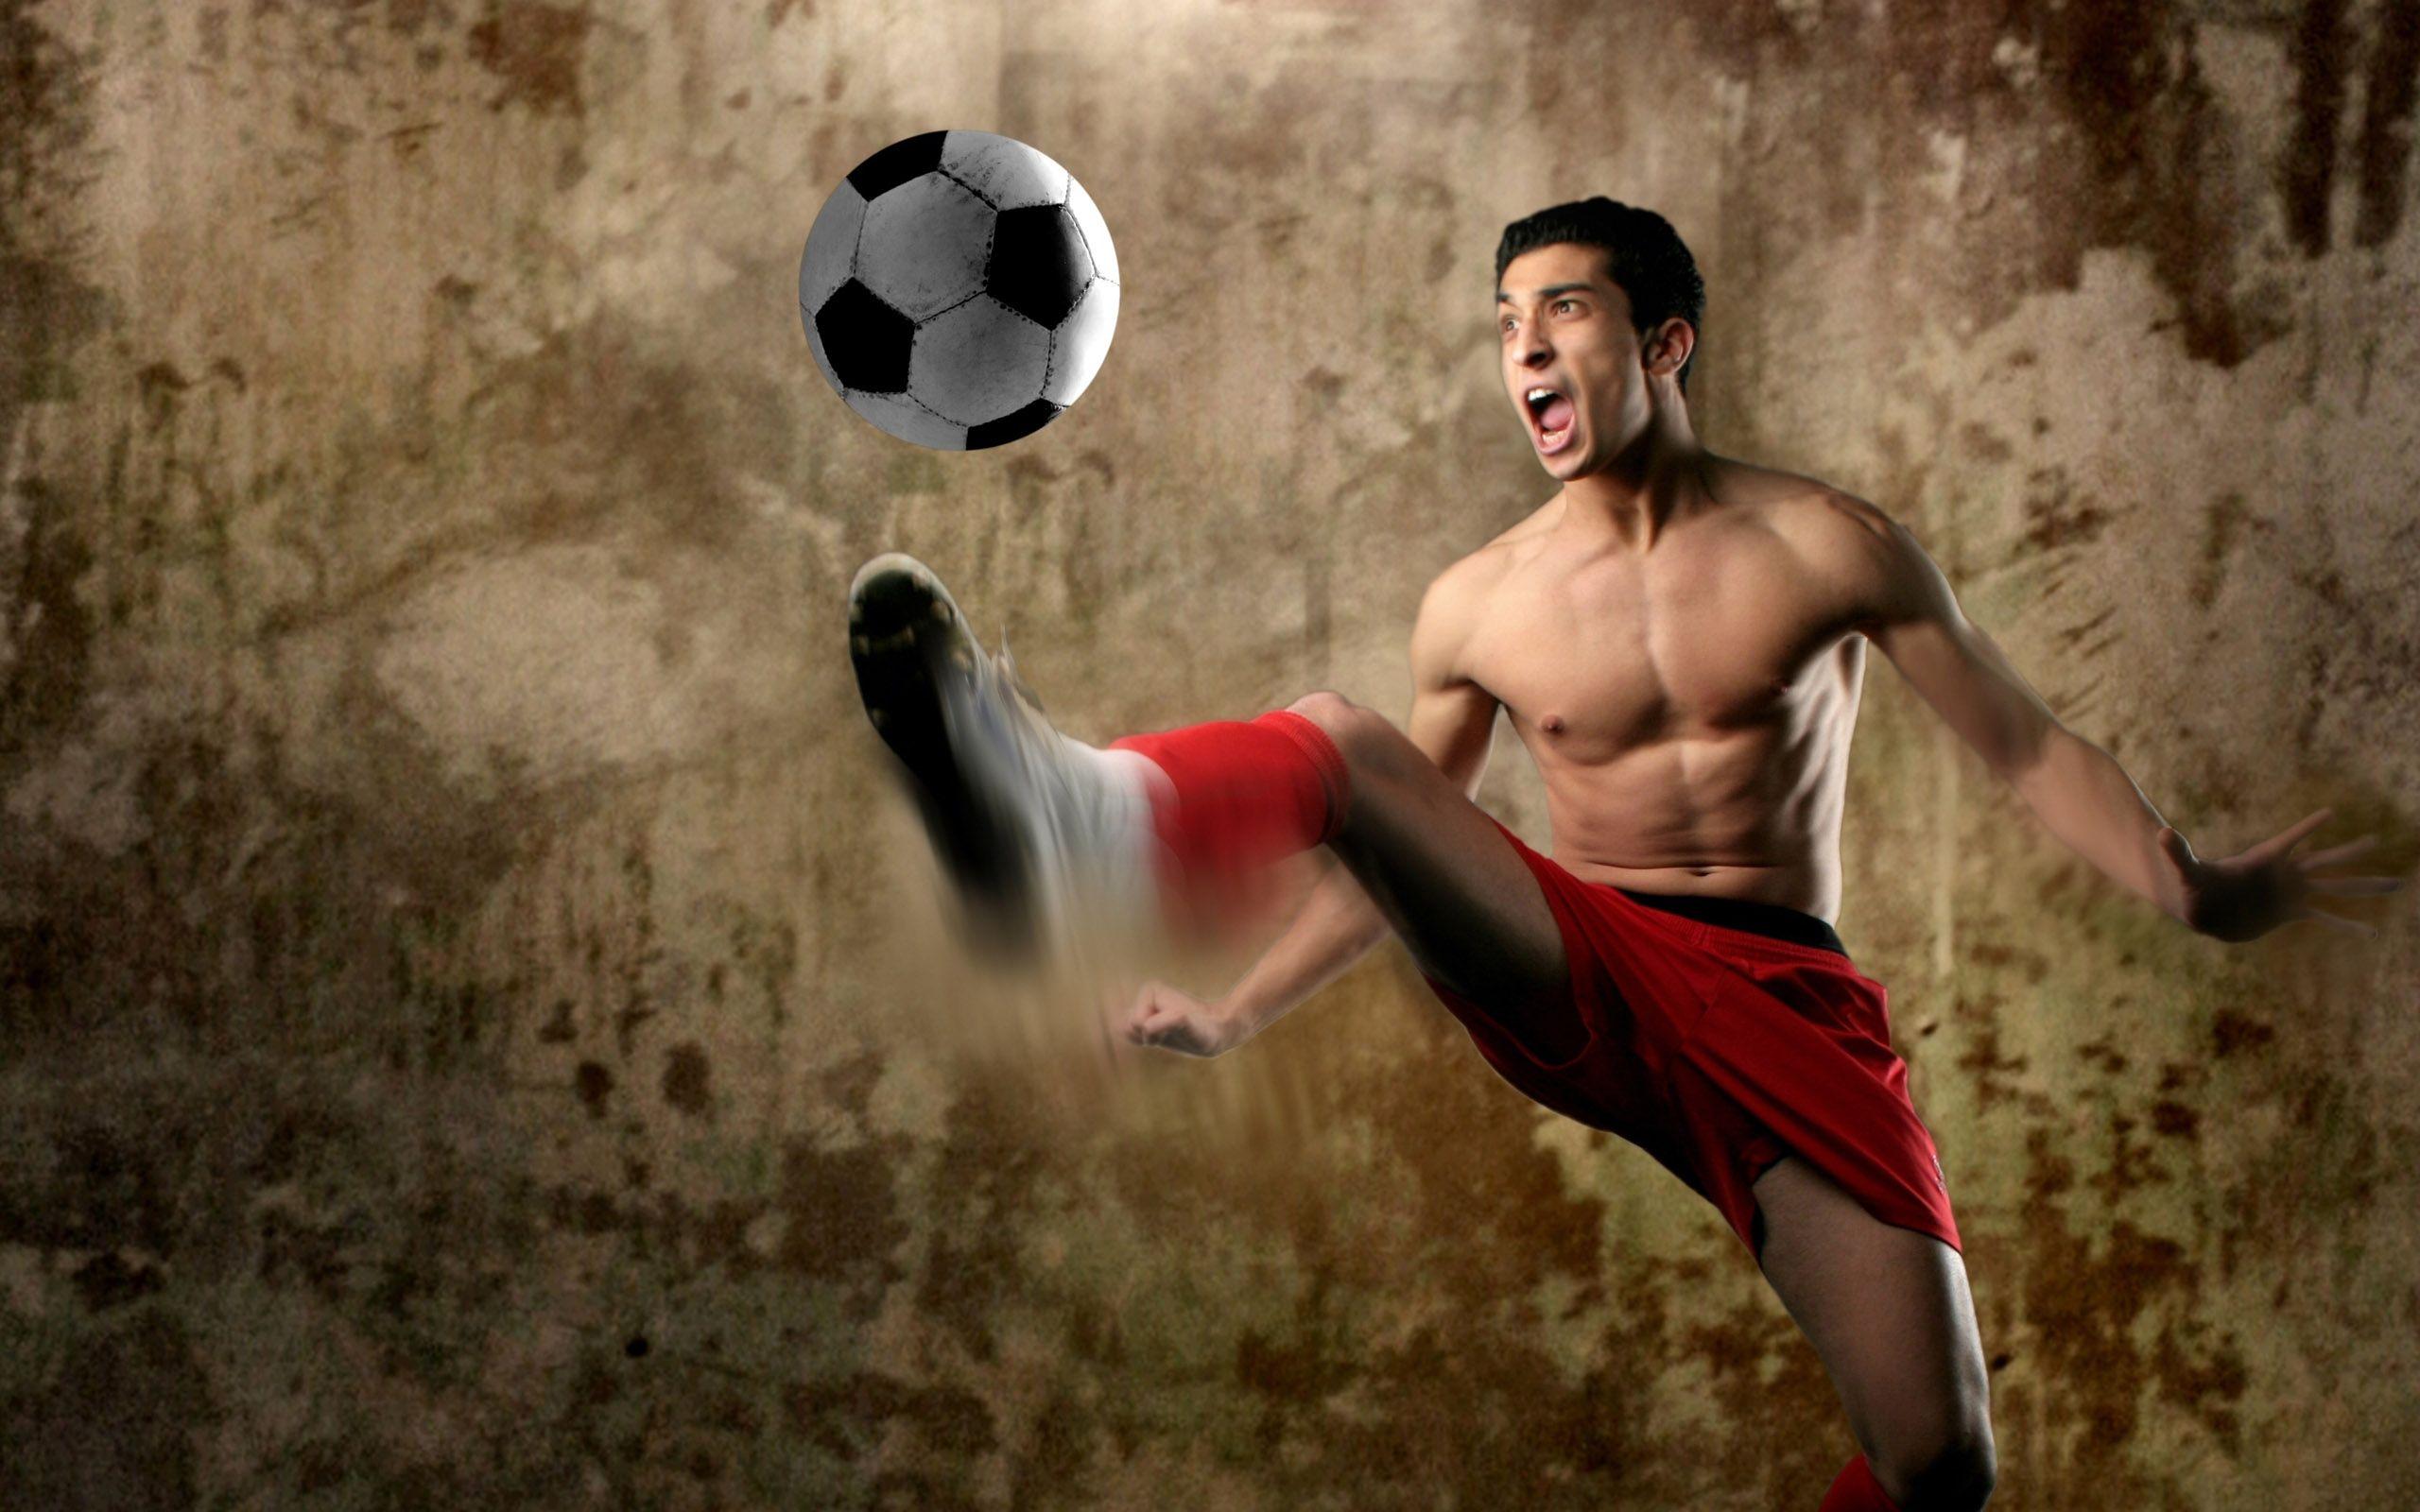 Cool Soccer Picture HD Wallpaper Background of Your Choice. HD